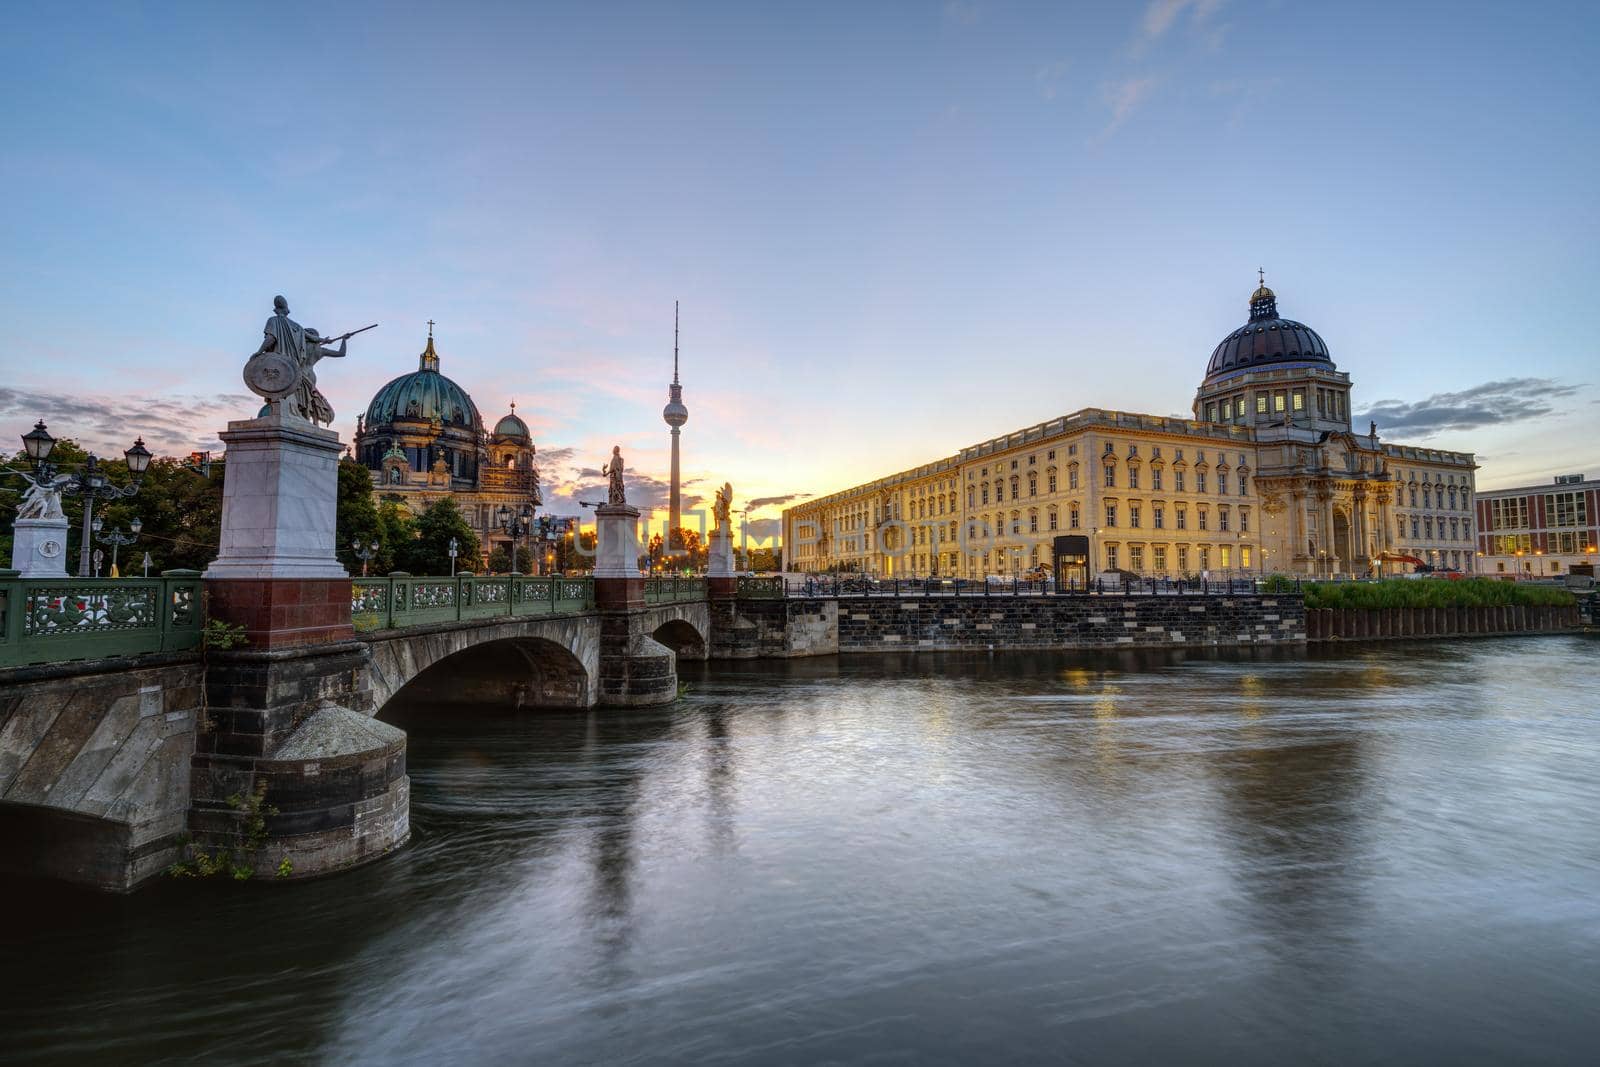 The City Palace, the Cathedral and the TV Tower in Berlin at sunrise